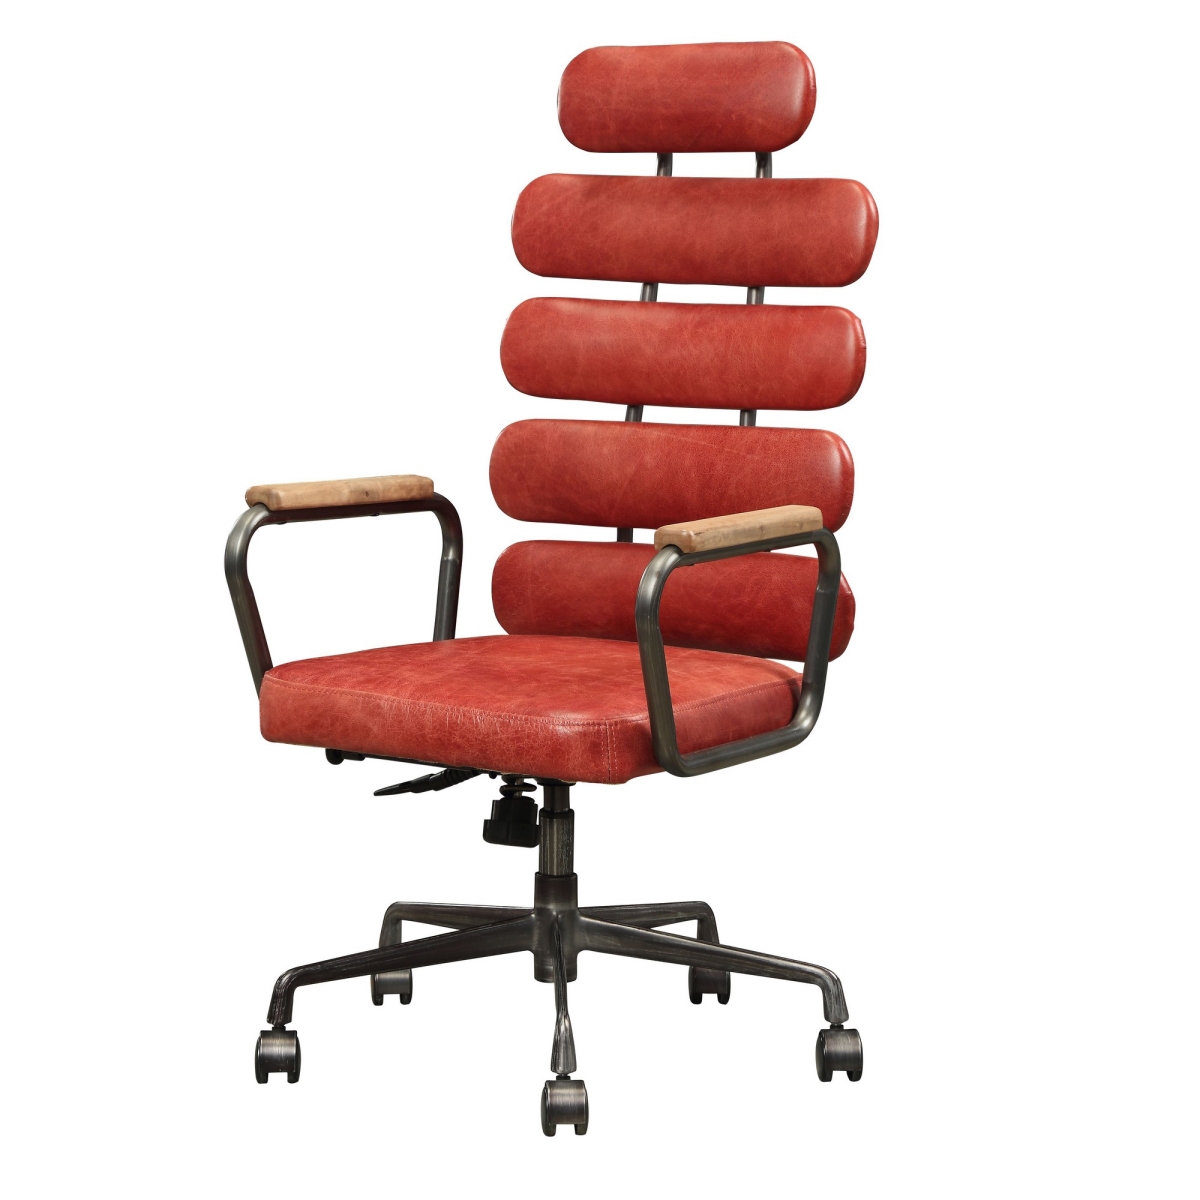 351885 Leatherette Metal Swivel Executive Chair With Five Horizontal Panels Backrest, Red & Gray